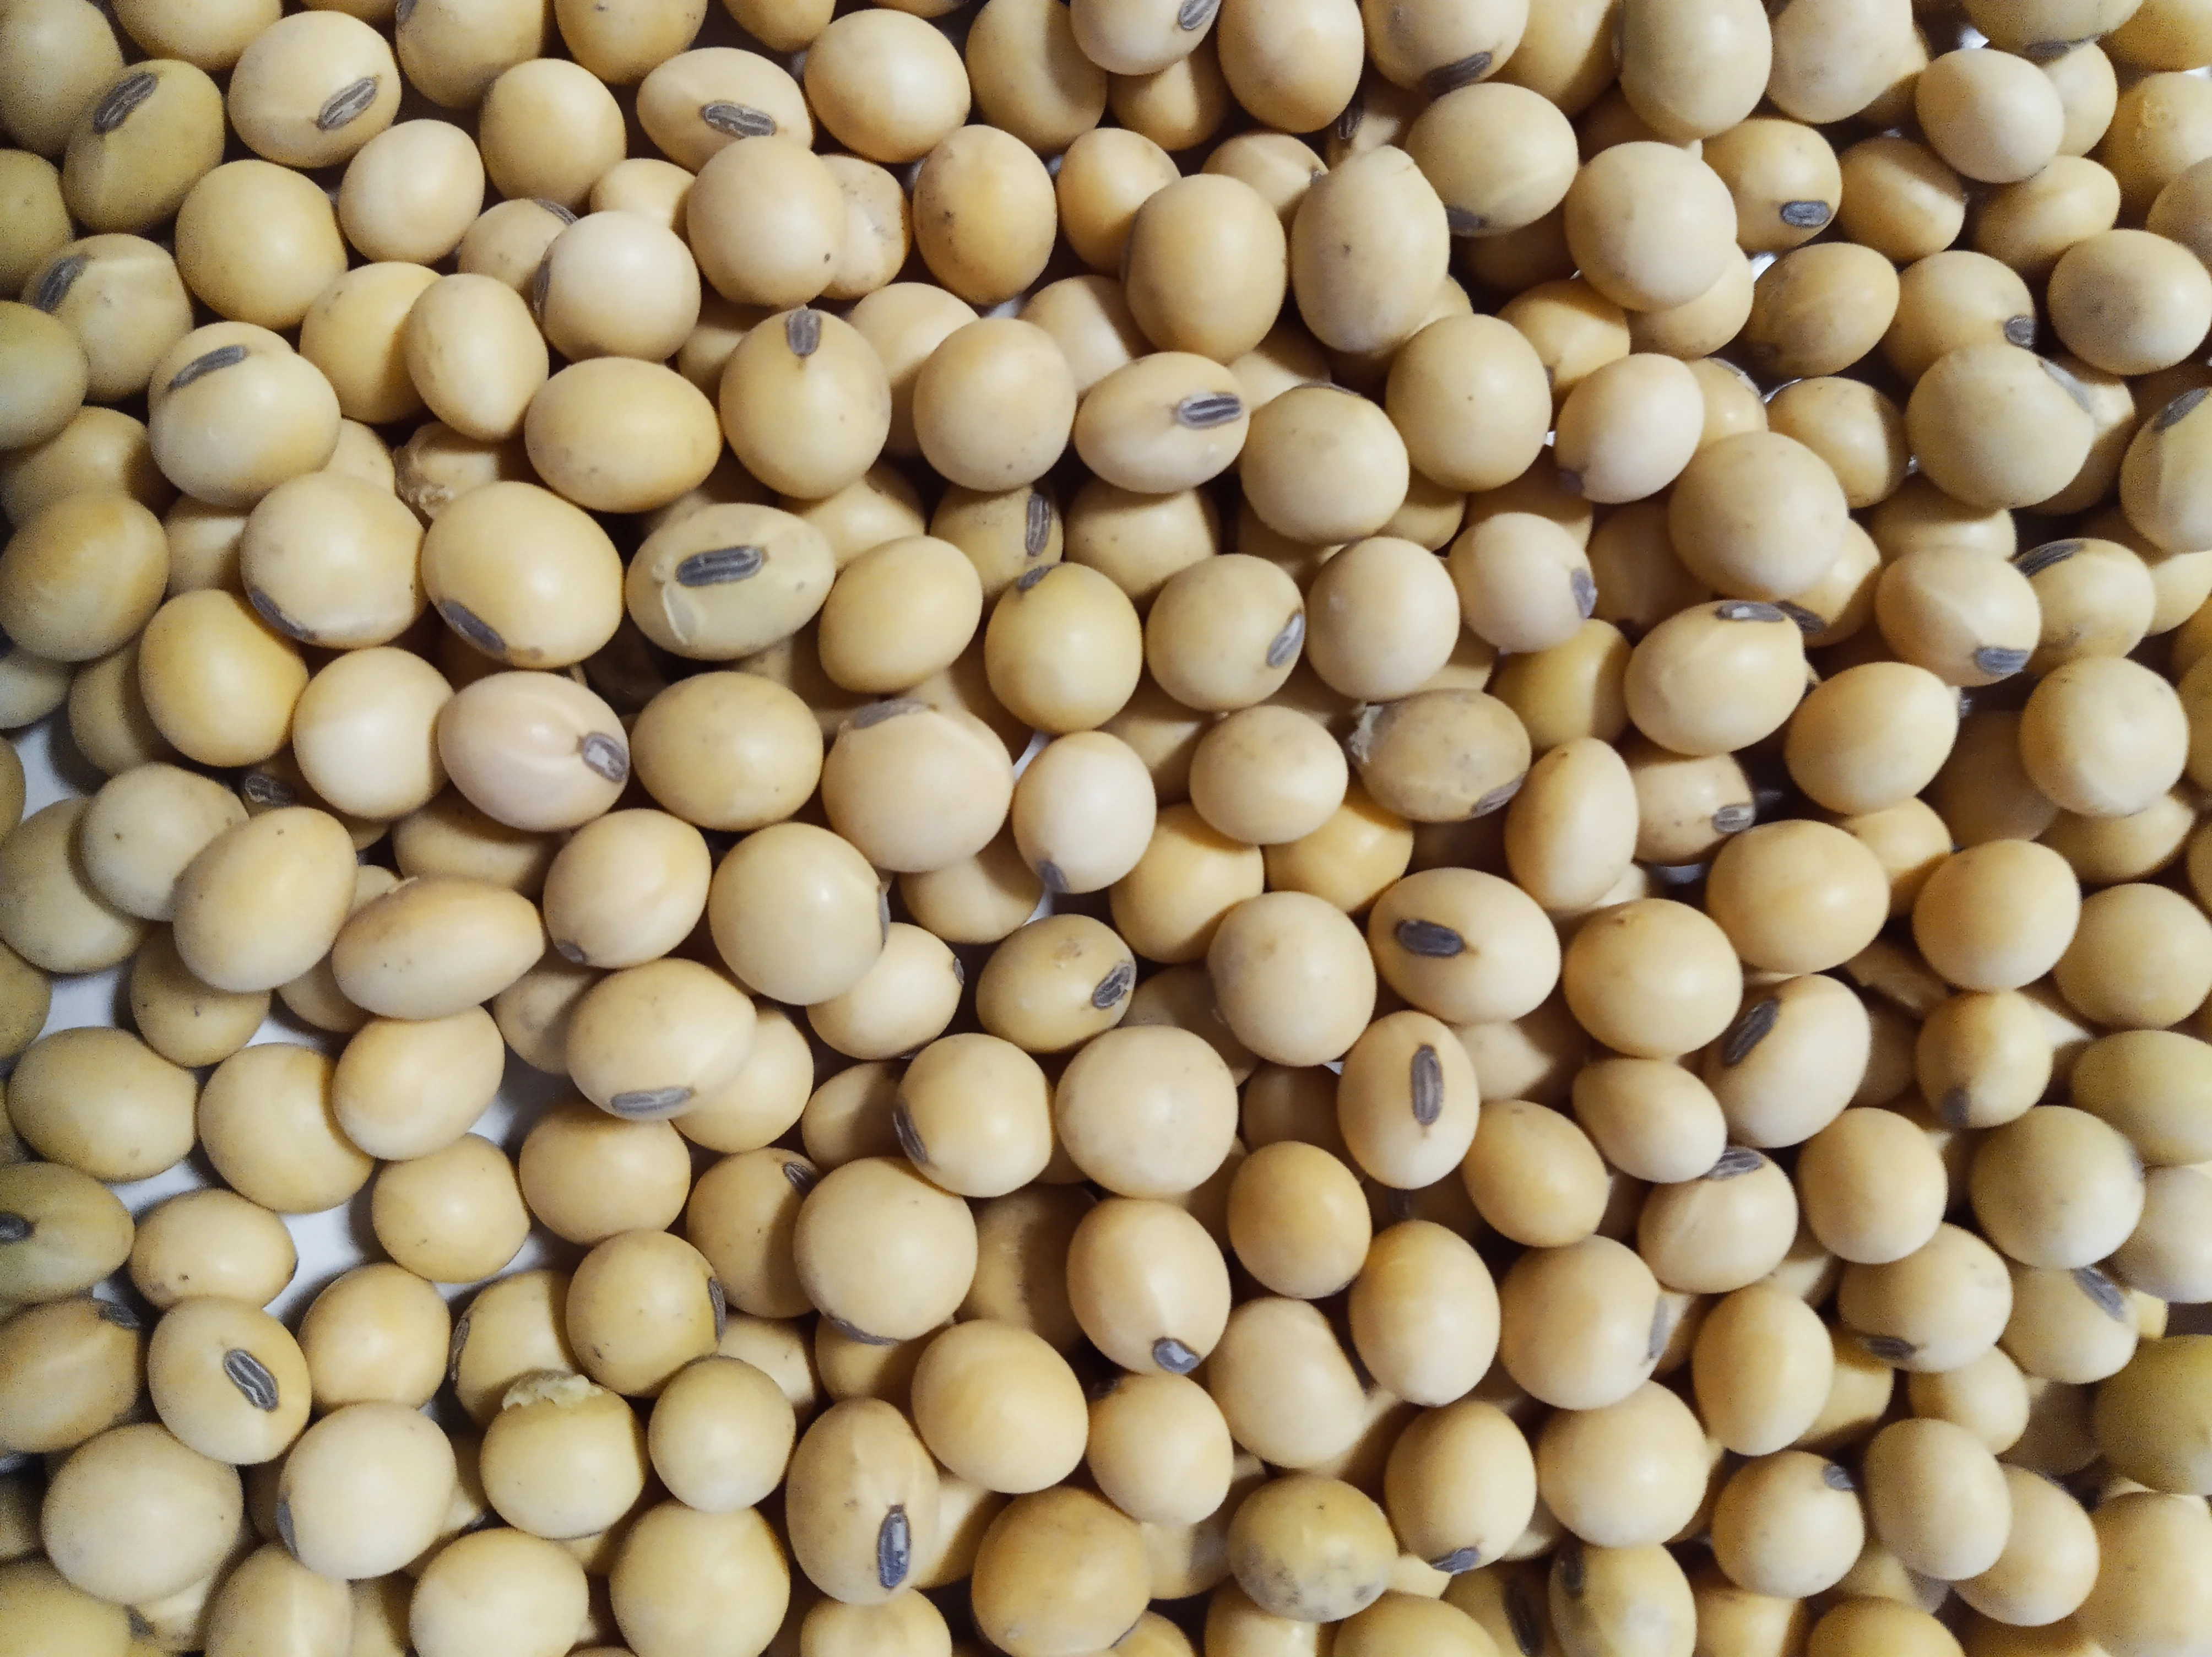 Non-GMO Soybean from Argentina